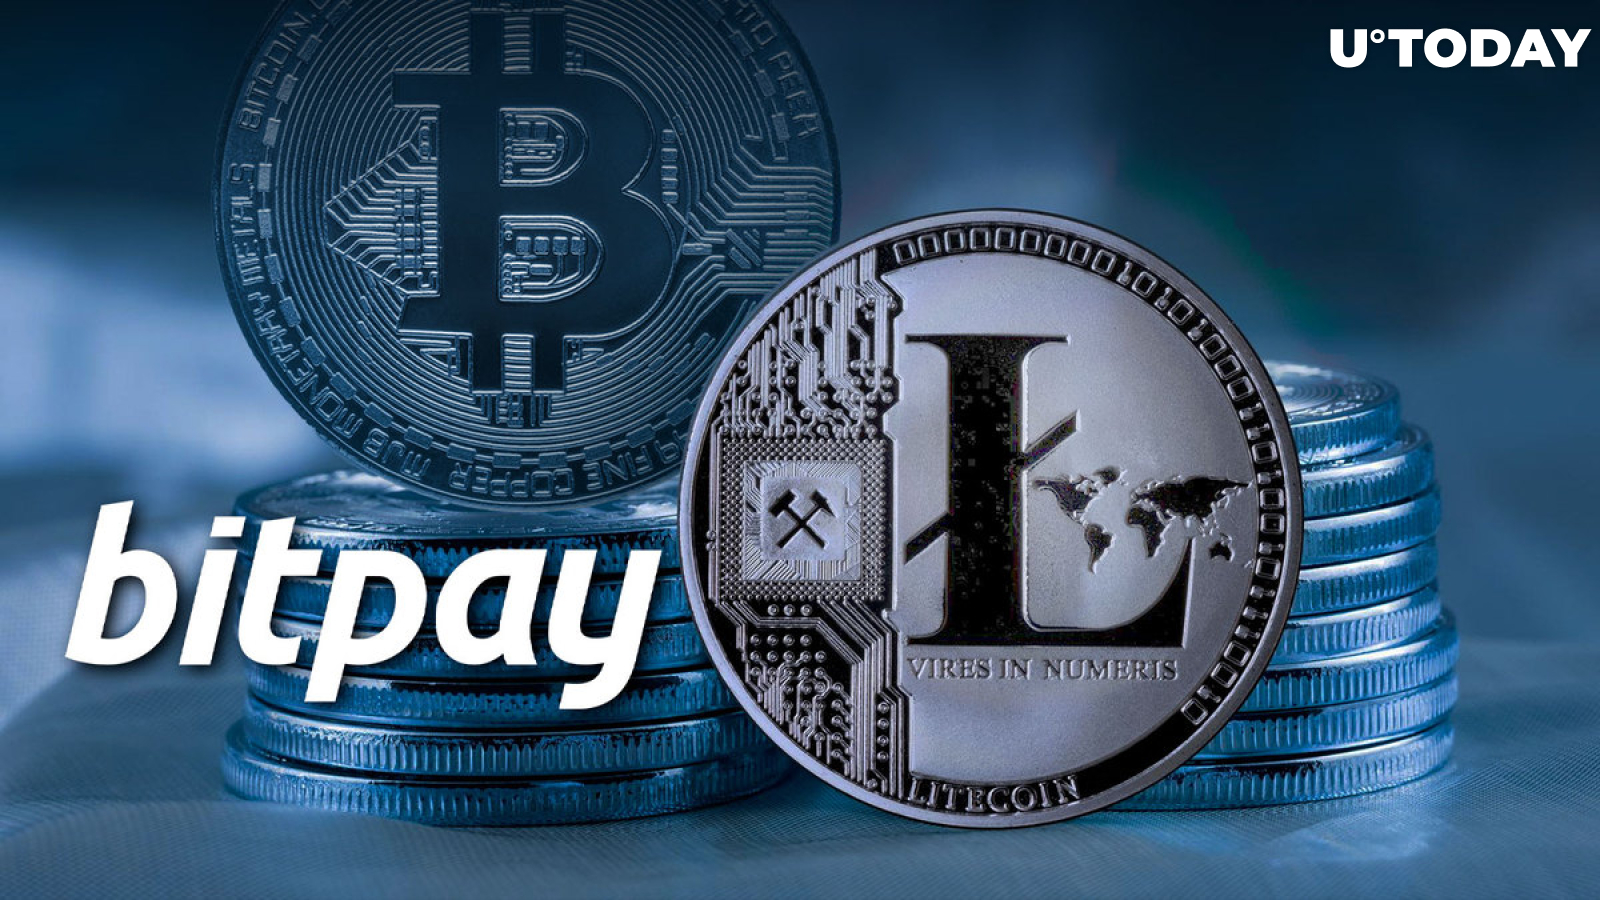 Litecoin (LTC) and Dogecoin (DOGE) Top BitPay Rankings